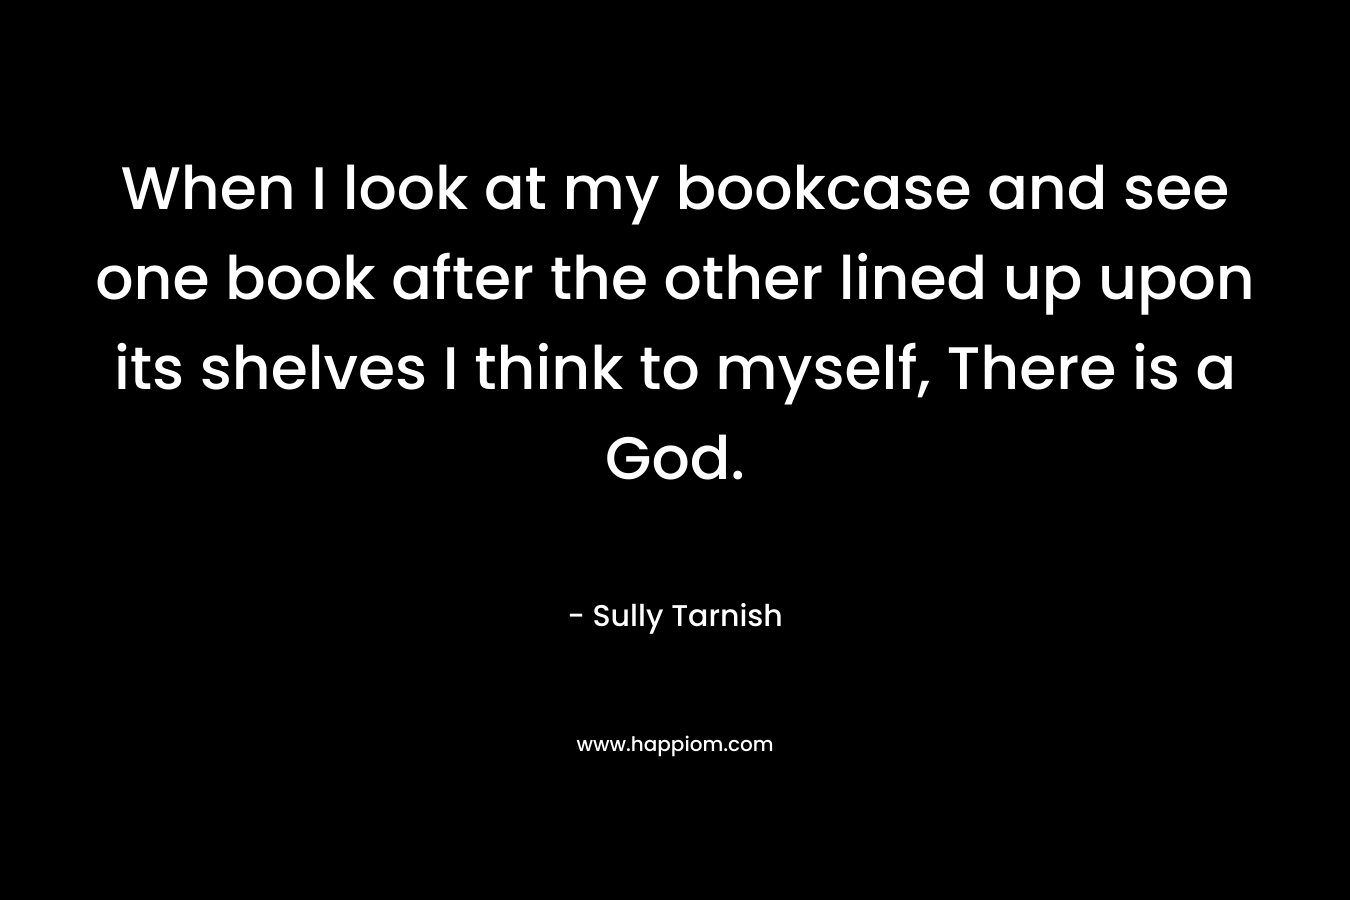 When I look at my bookcase and see one book after the other lined up upon its shelves I think to myself, There is a God. – Sully Tarnish